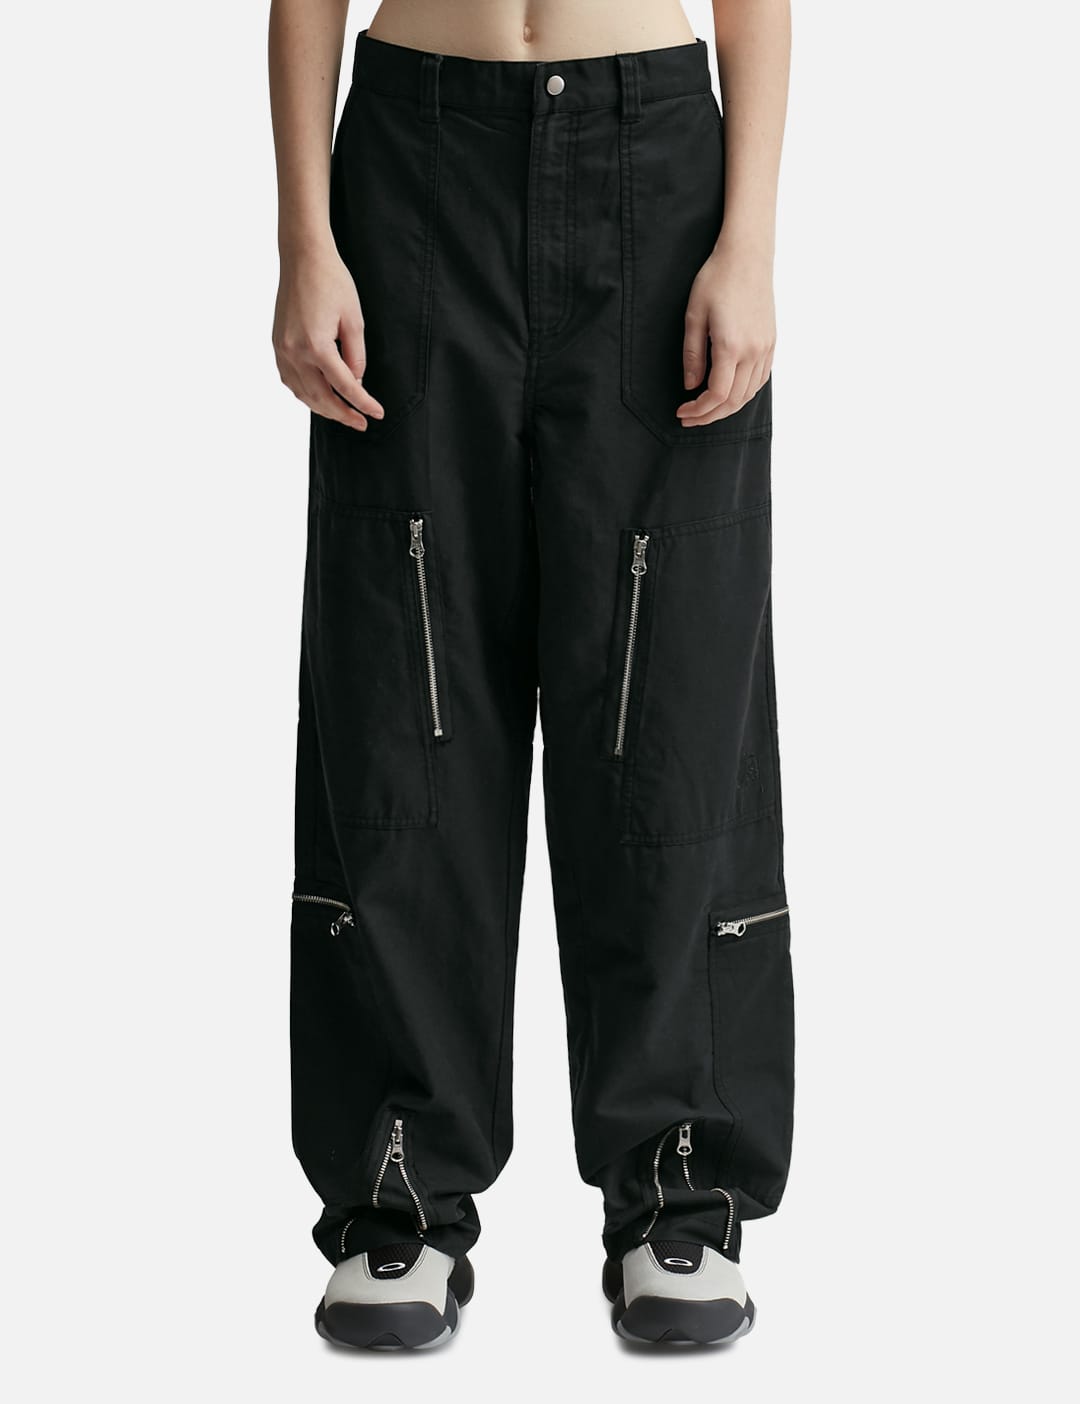 Stüssy - Nyco Flight Pant | HBX - Globally Curated Fashion and